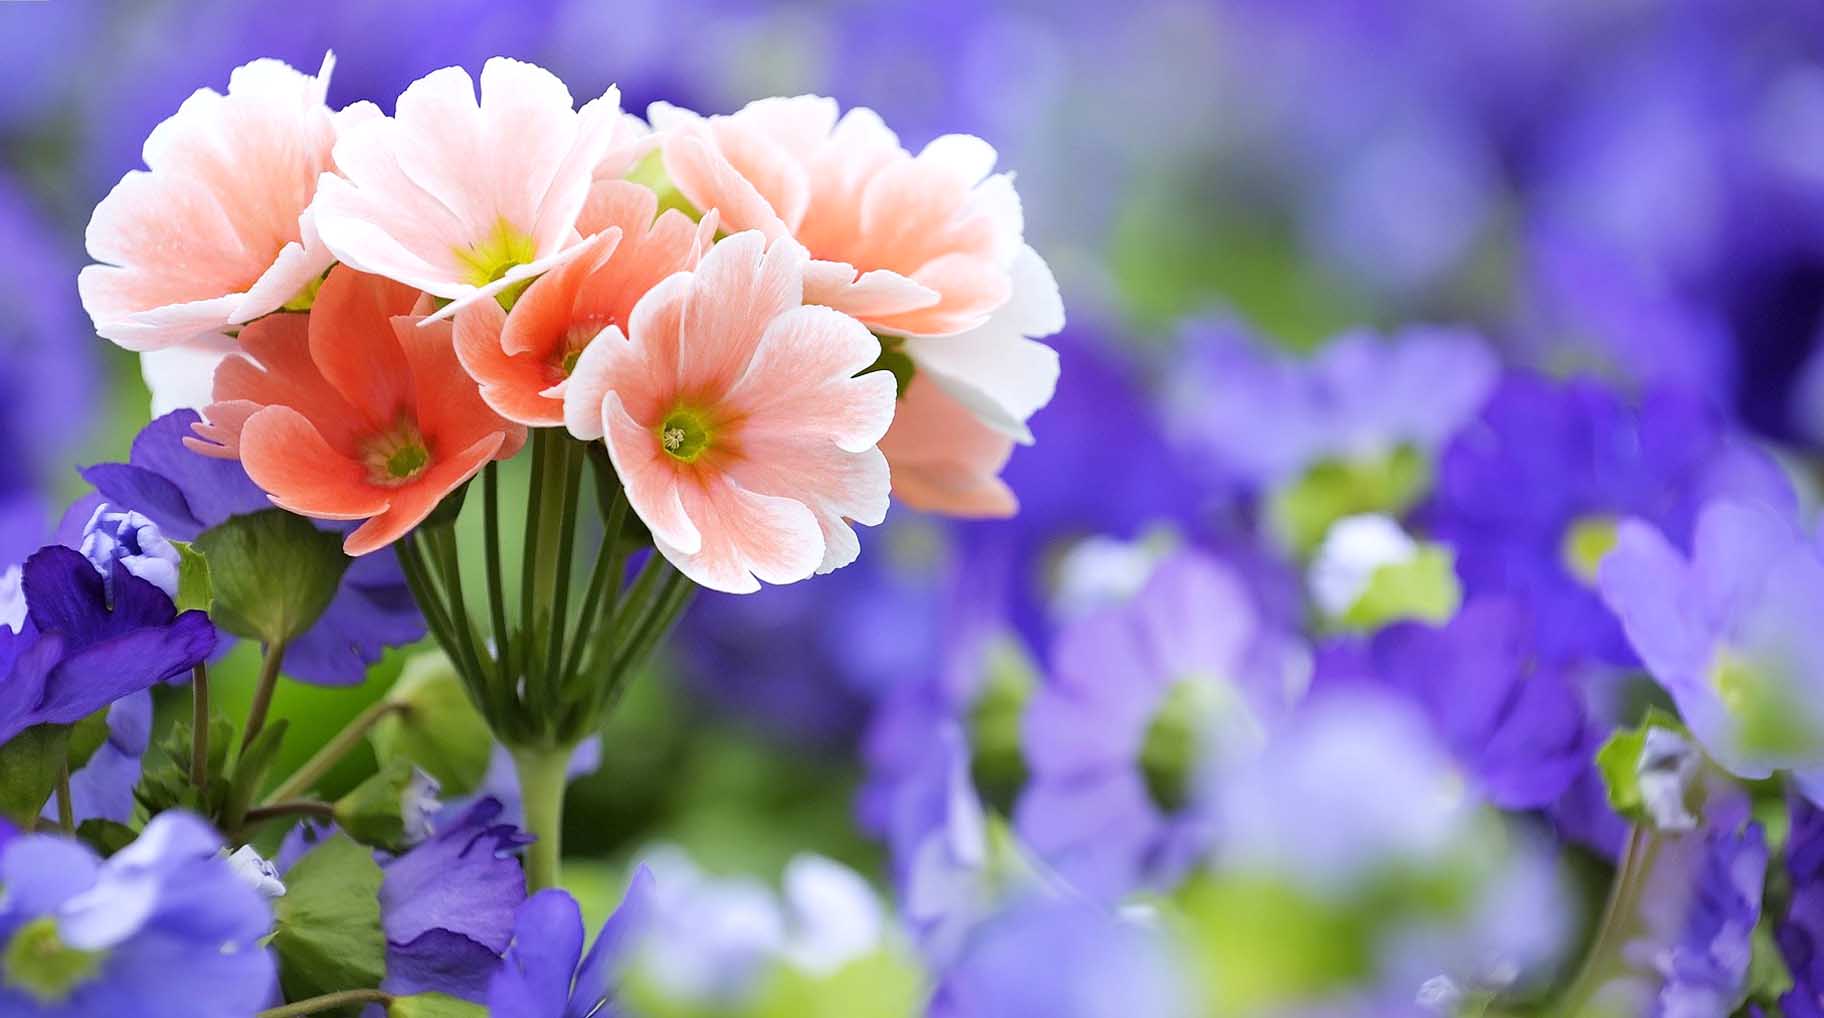 Download Wallpapers Of Flowers and Nature